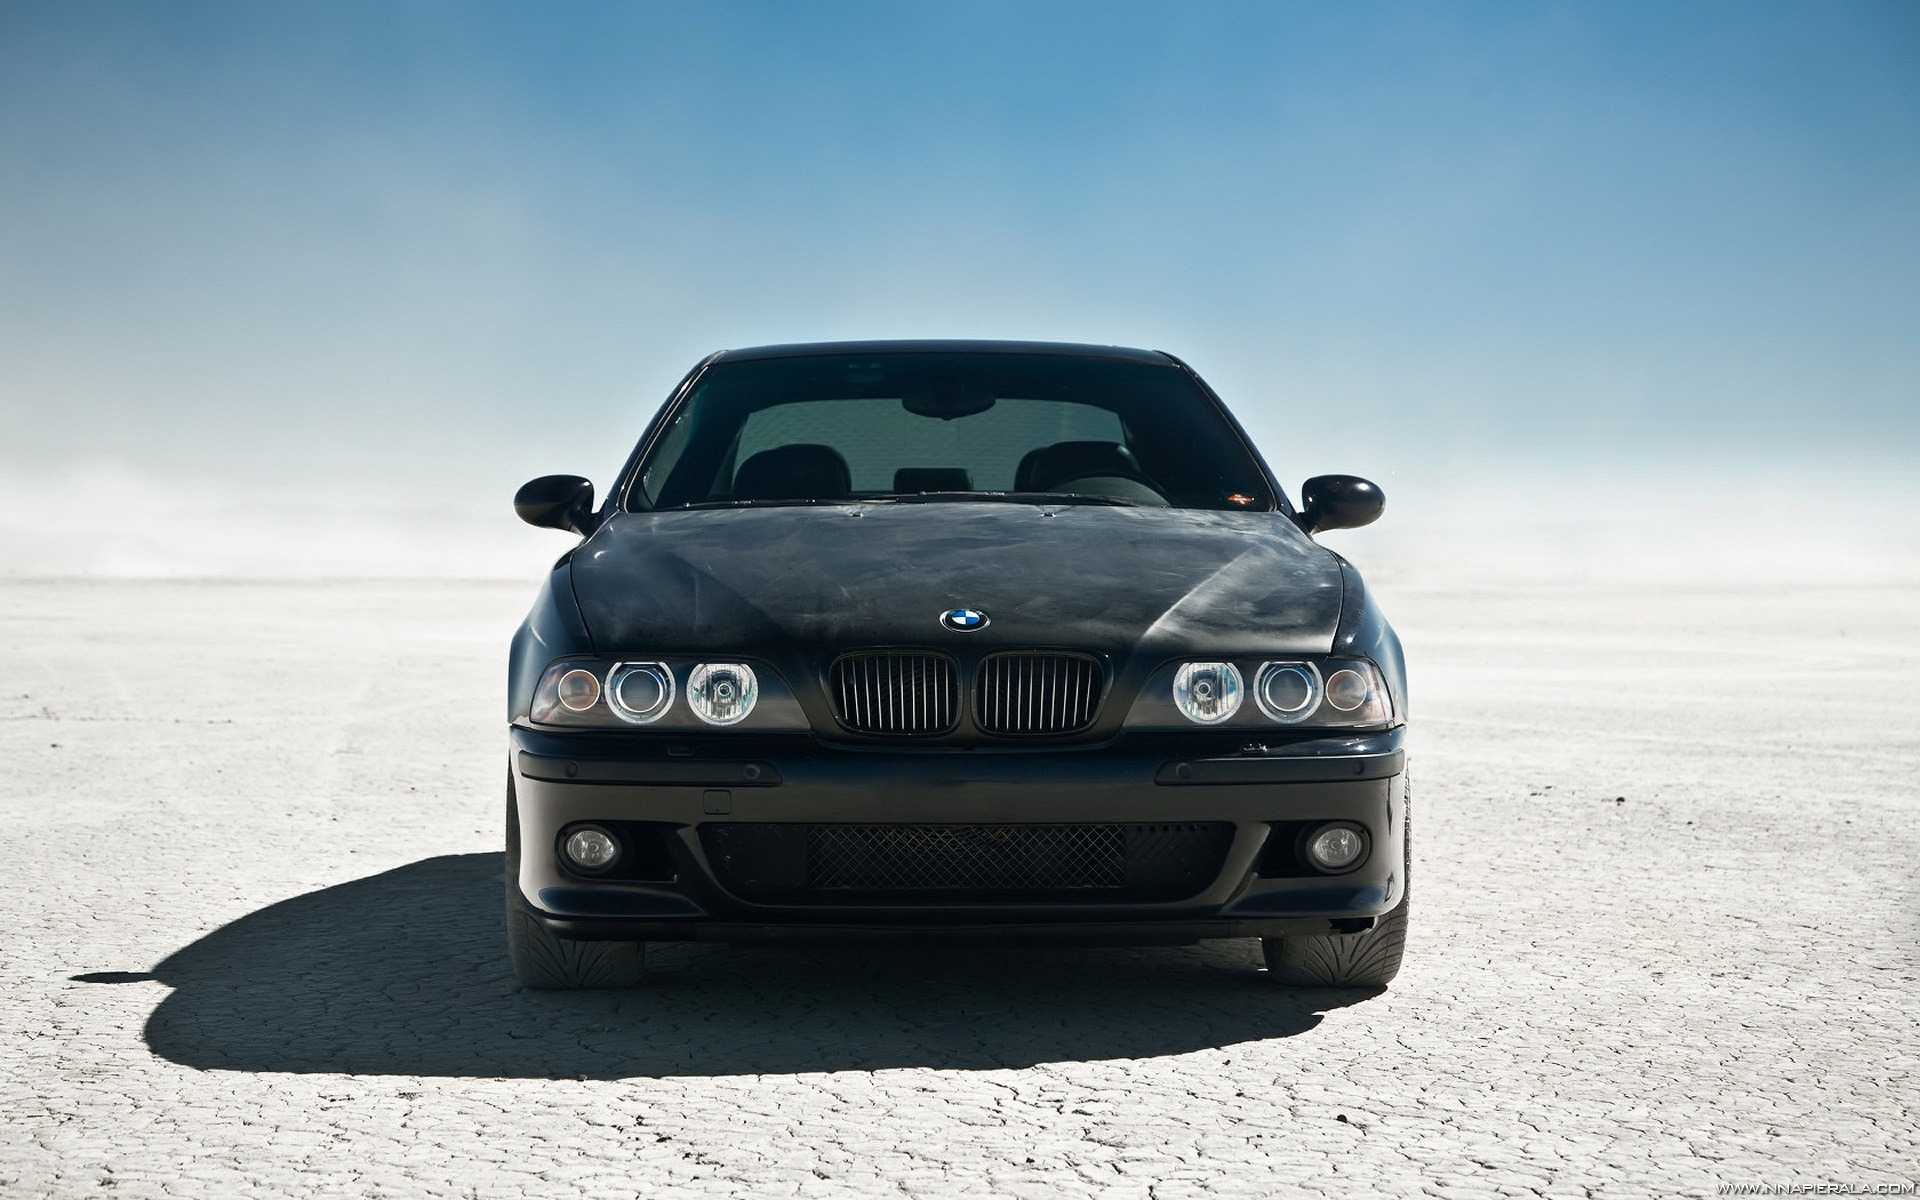 Bmw e39 wallpapers - most popular bmw e39 wallpapers backgrounds - gtwallpaper